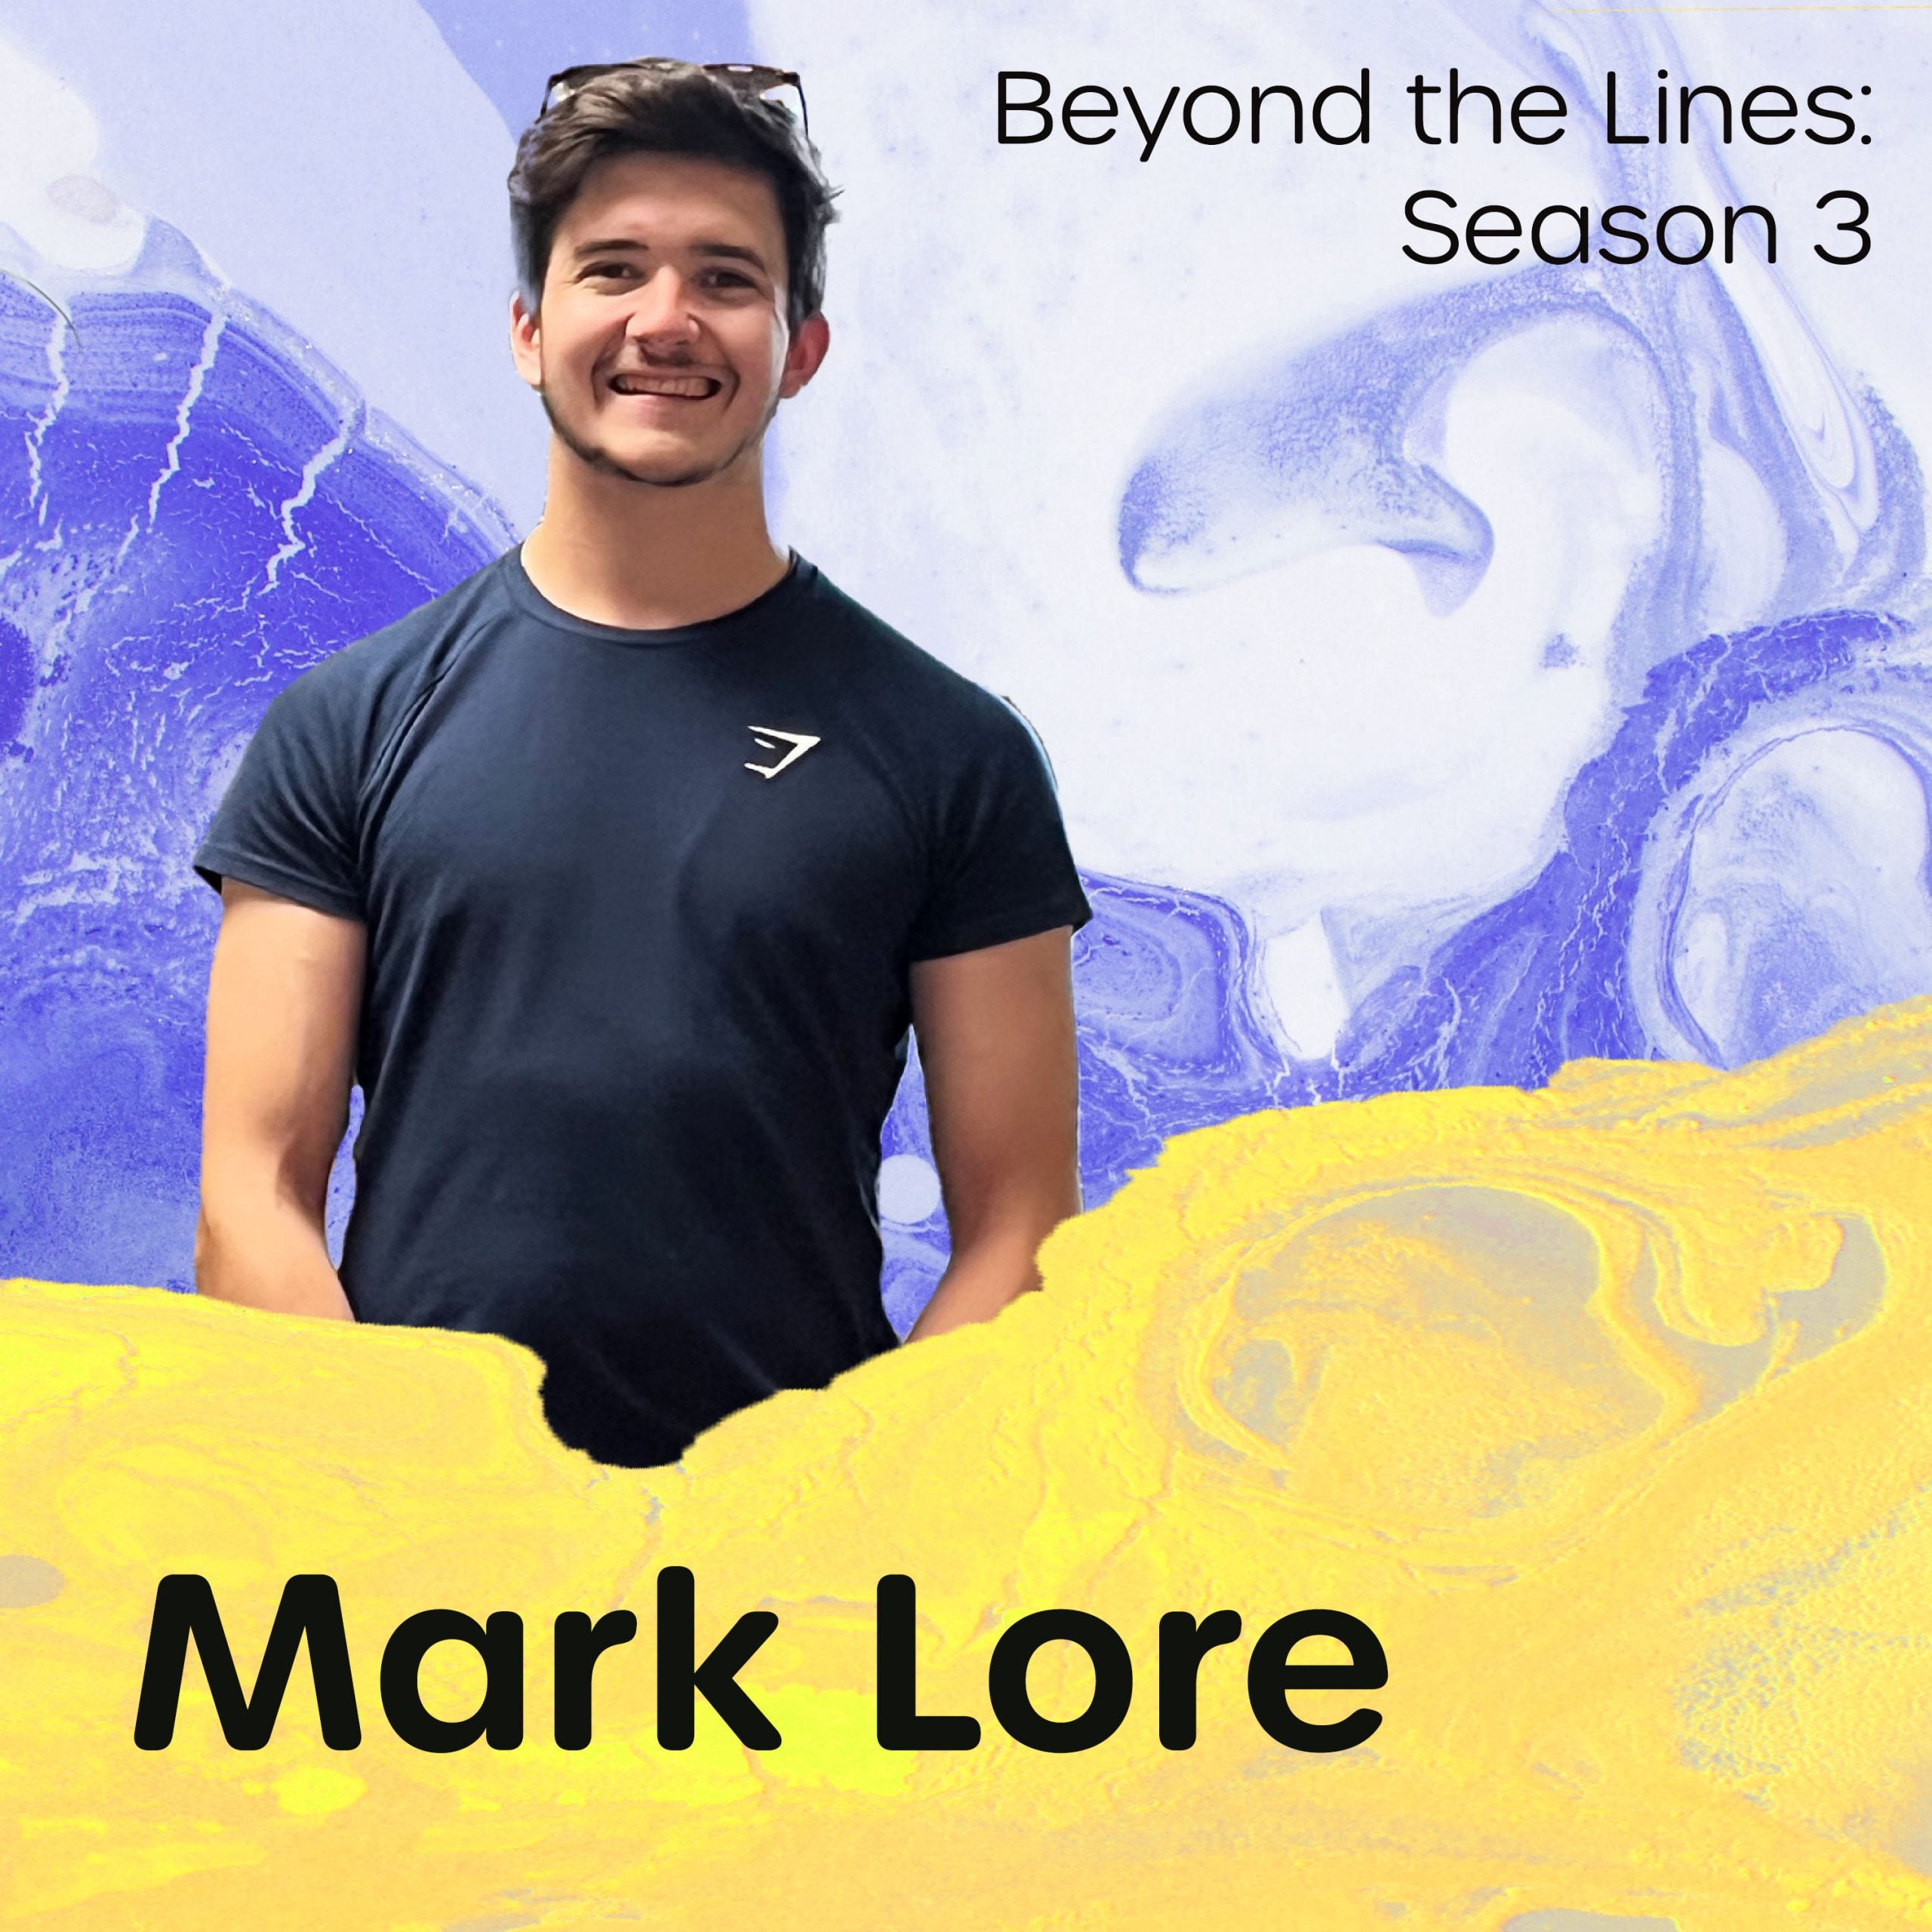 Photo of Mark Lore smiling